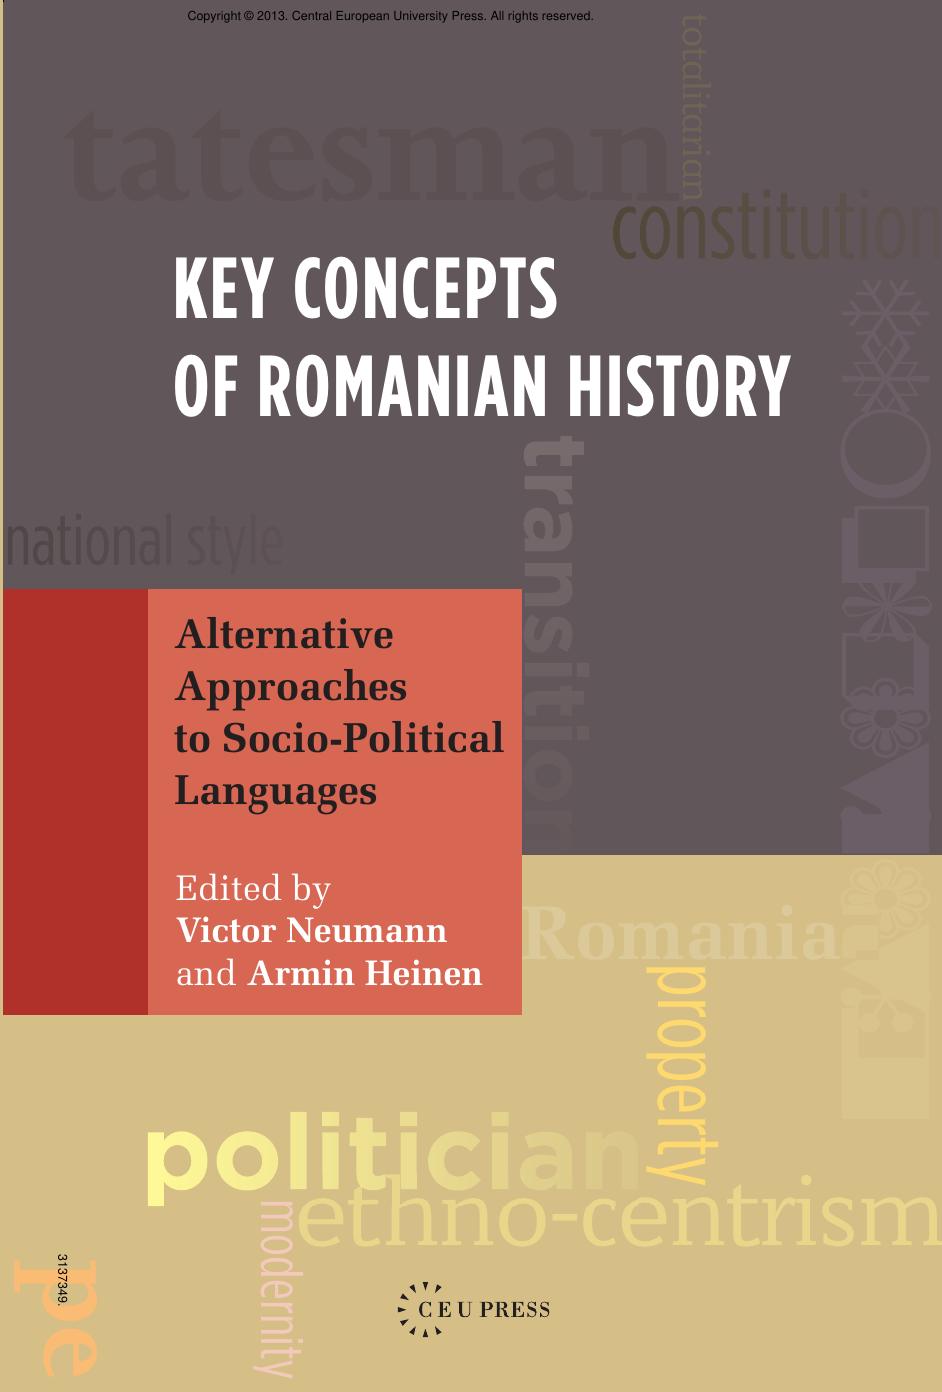 Key Concepts of Romanian History : Alternative Approaches to Socio-Political Languages by Victor Neumann; Armin Heinen